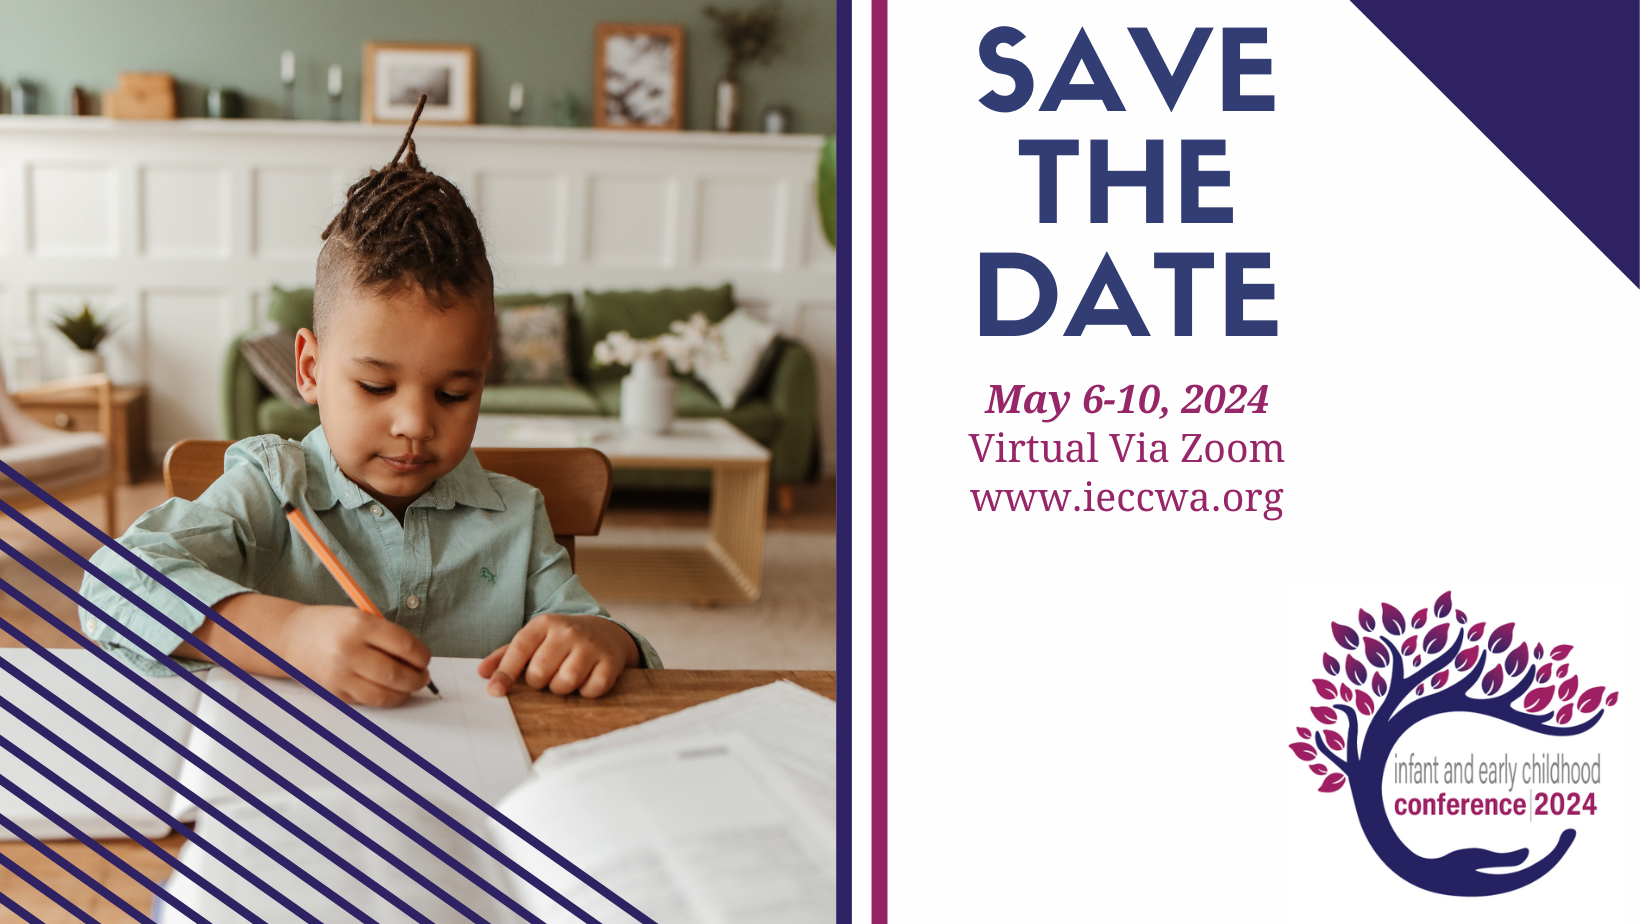 Save the Date for 2024 Infant and Early Childhood Conference